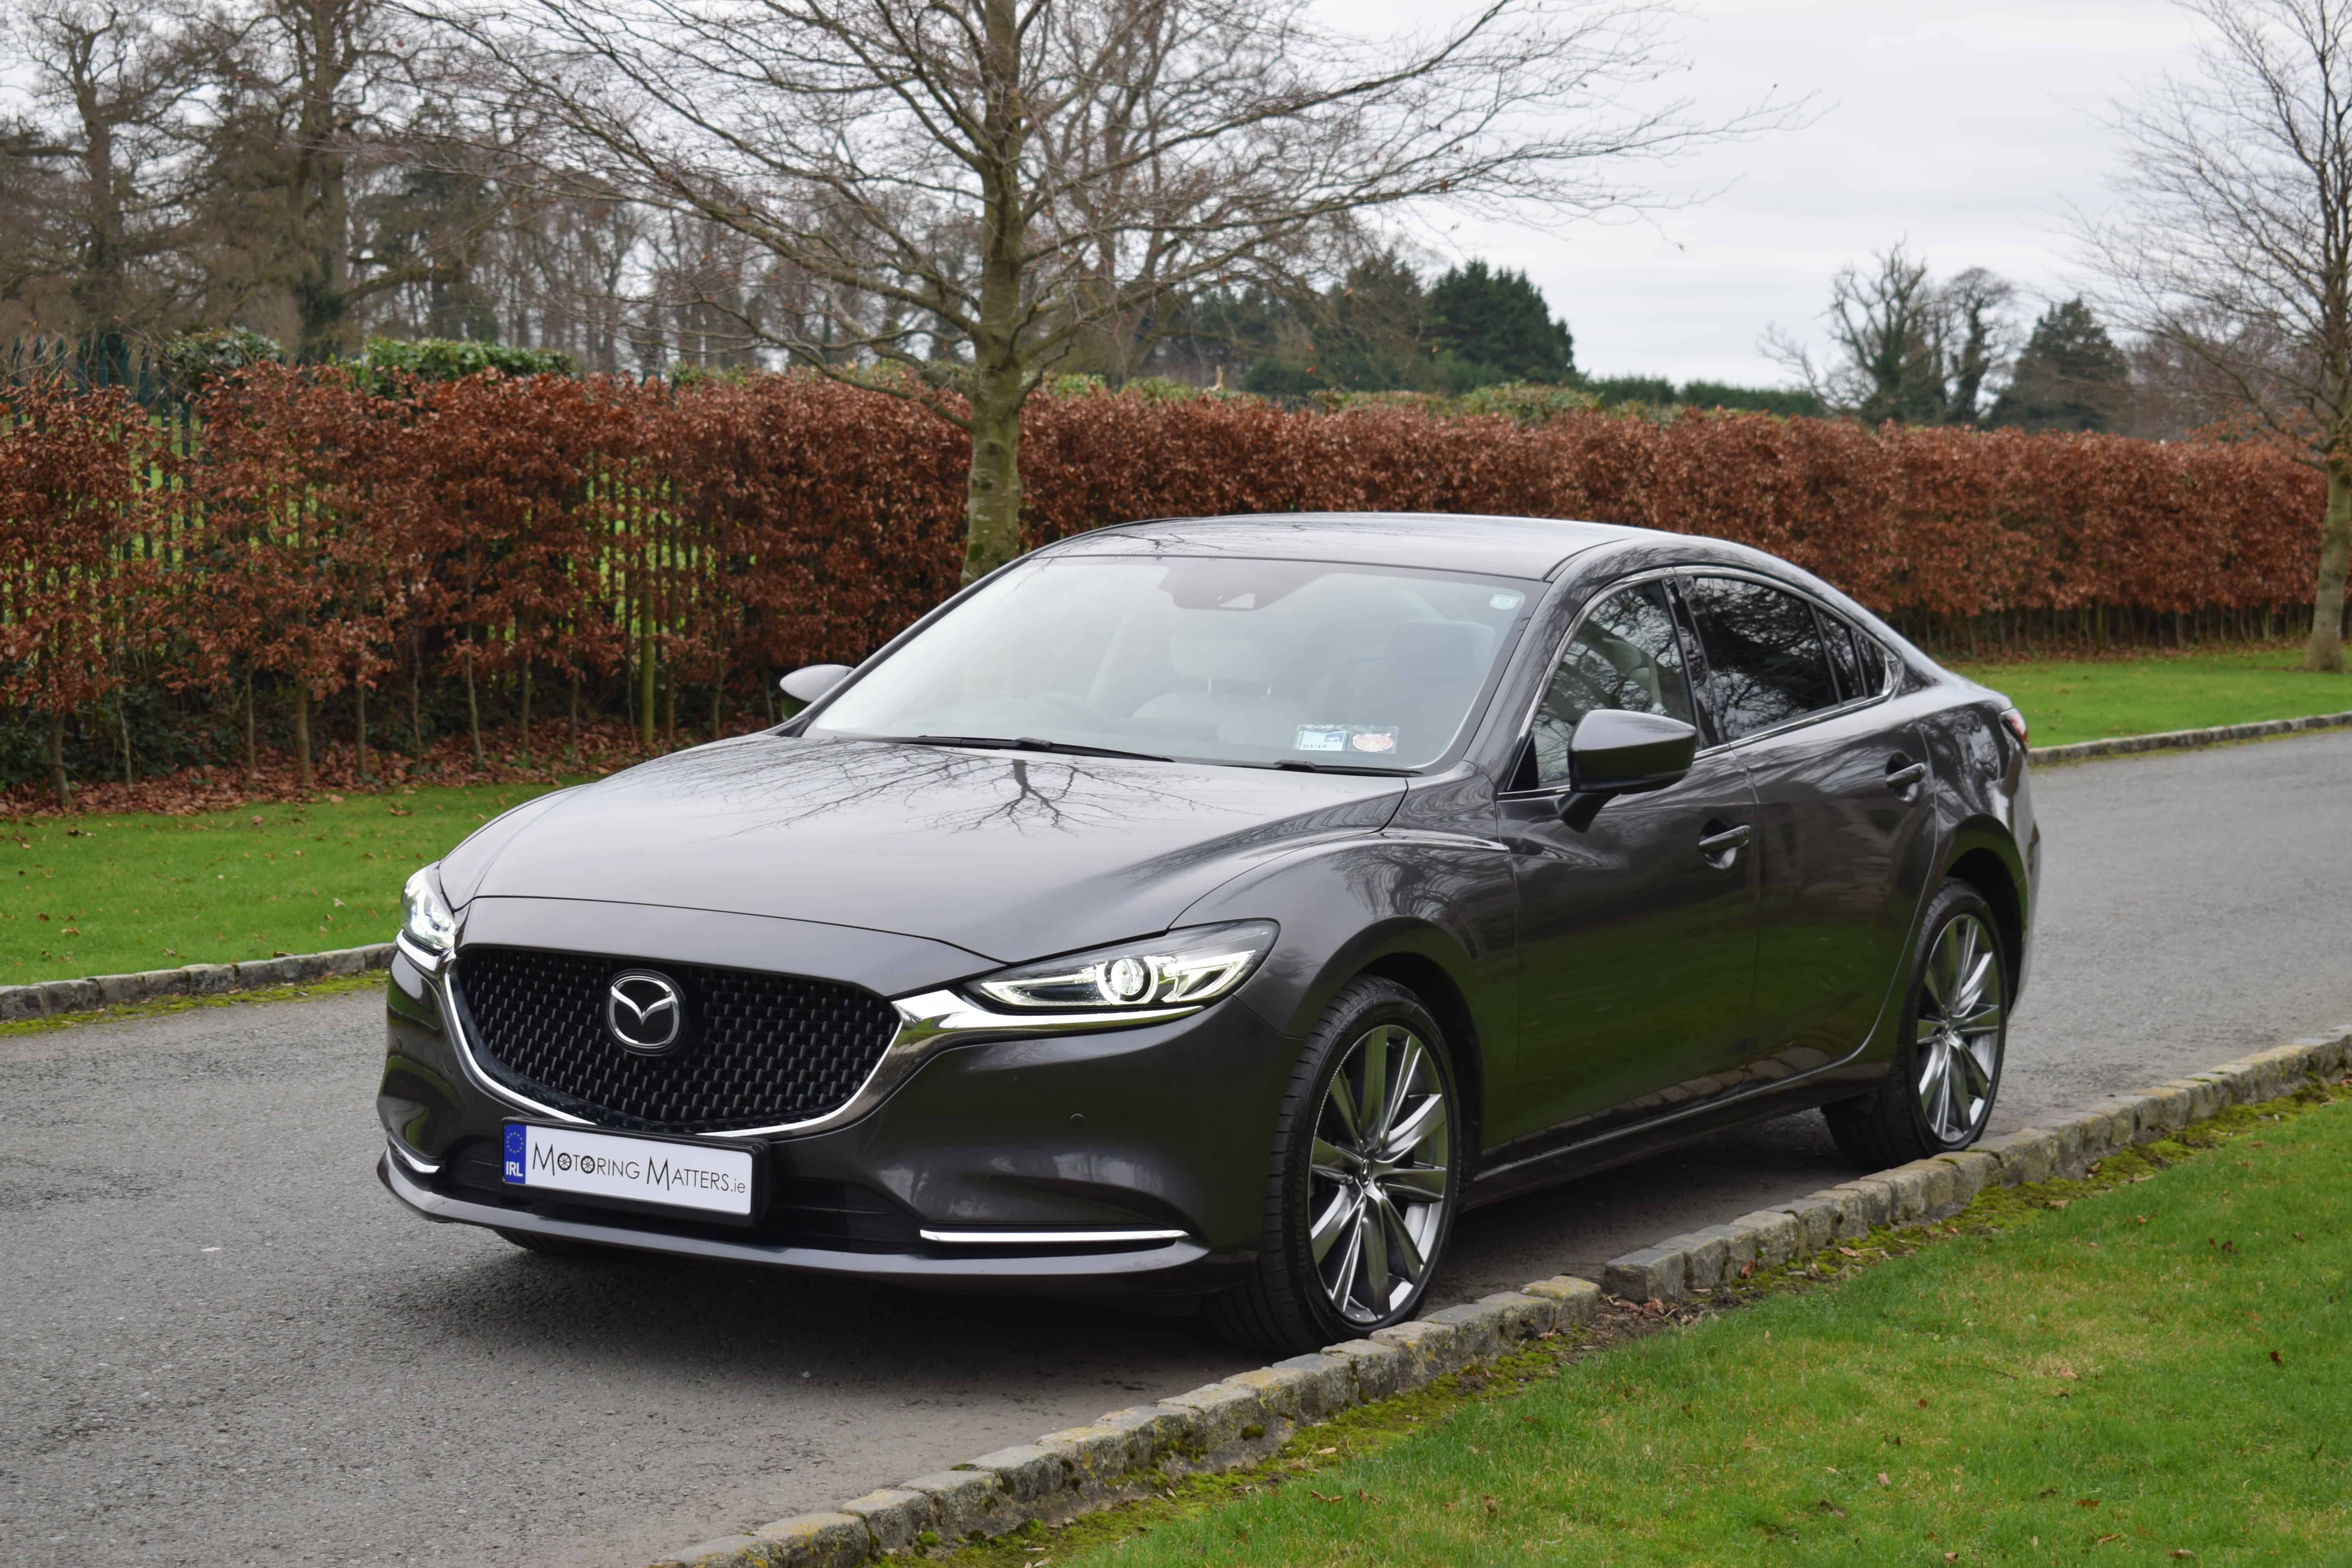 Stunning New Mazda 6 Saloon Redefining Expectations Motoring Matters